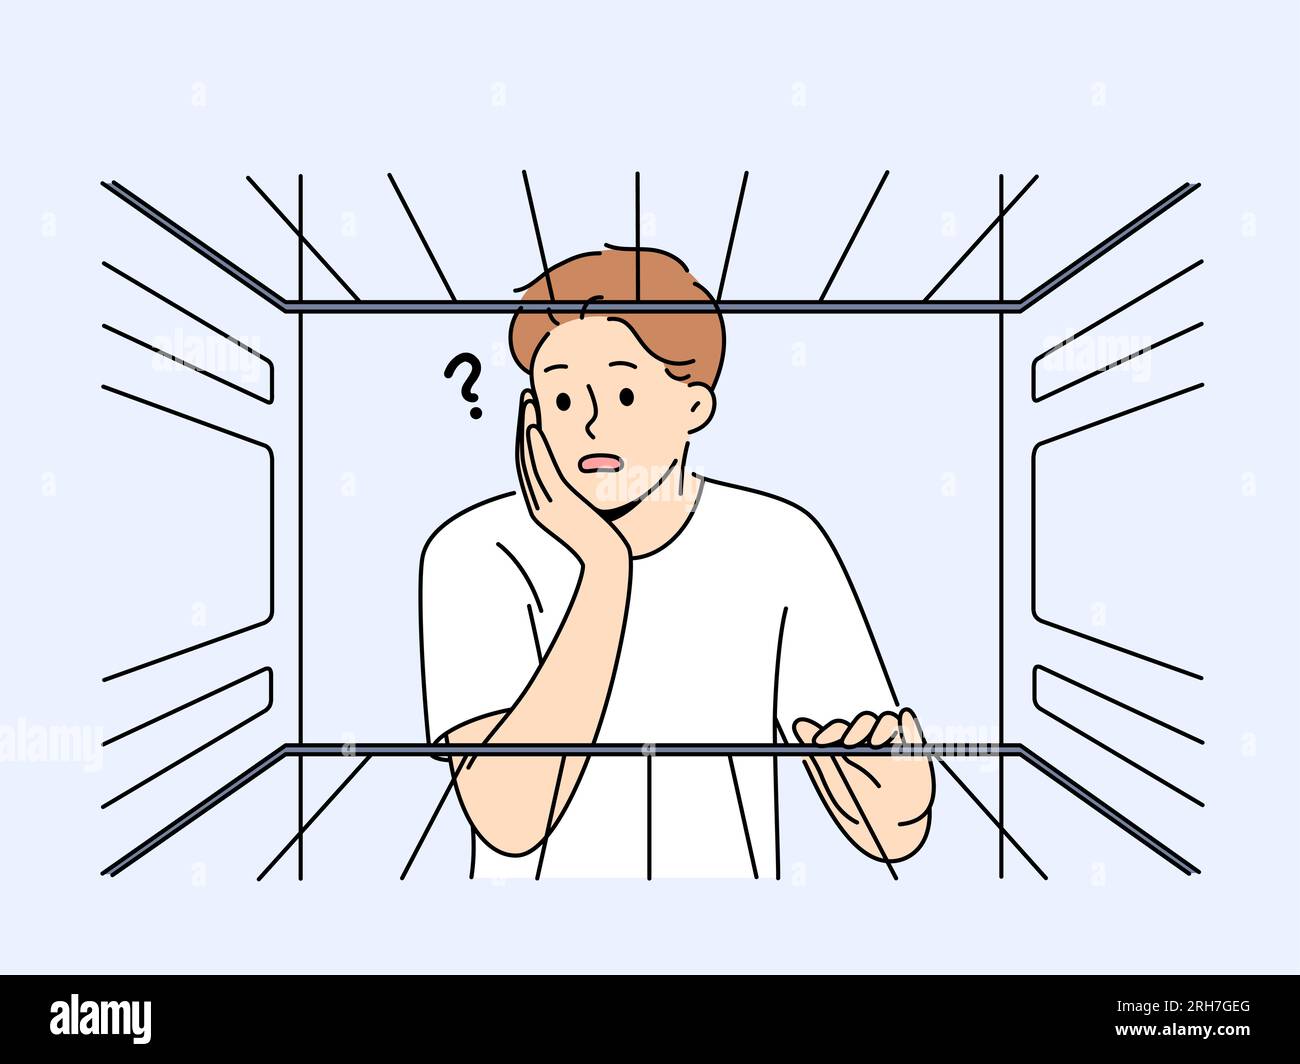 Hungry man sees empty refrigerator and is nervous about lack food due to poverty and financial crisis. Young embarrassed guy looks into refrigerator compartment surprised by lack products on shelves Stock Vector